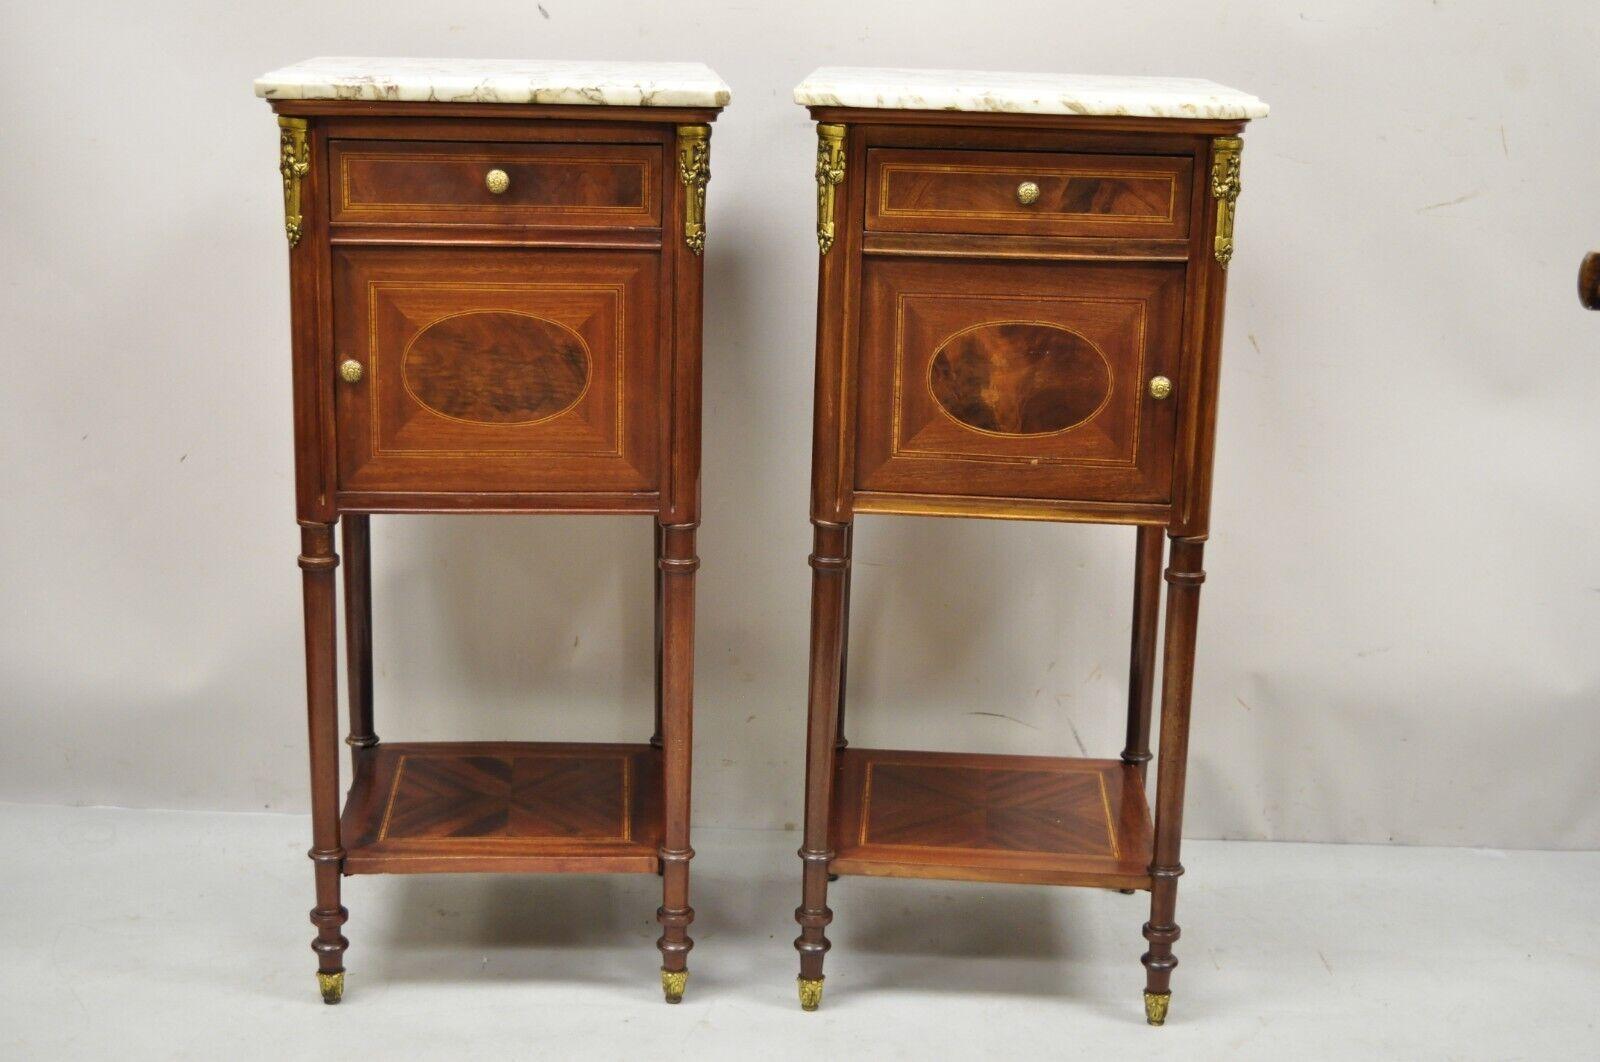 Antique French Louis XVI style marquetry inlay marble top nightstand washstands - a pair. Item features porcelain interior, marquetry inlay, bronze ormolu, lower shelf, removable marble top, finished back,1 dovetailed drawer, very nice antique pair,